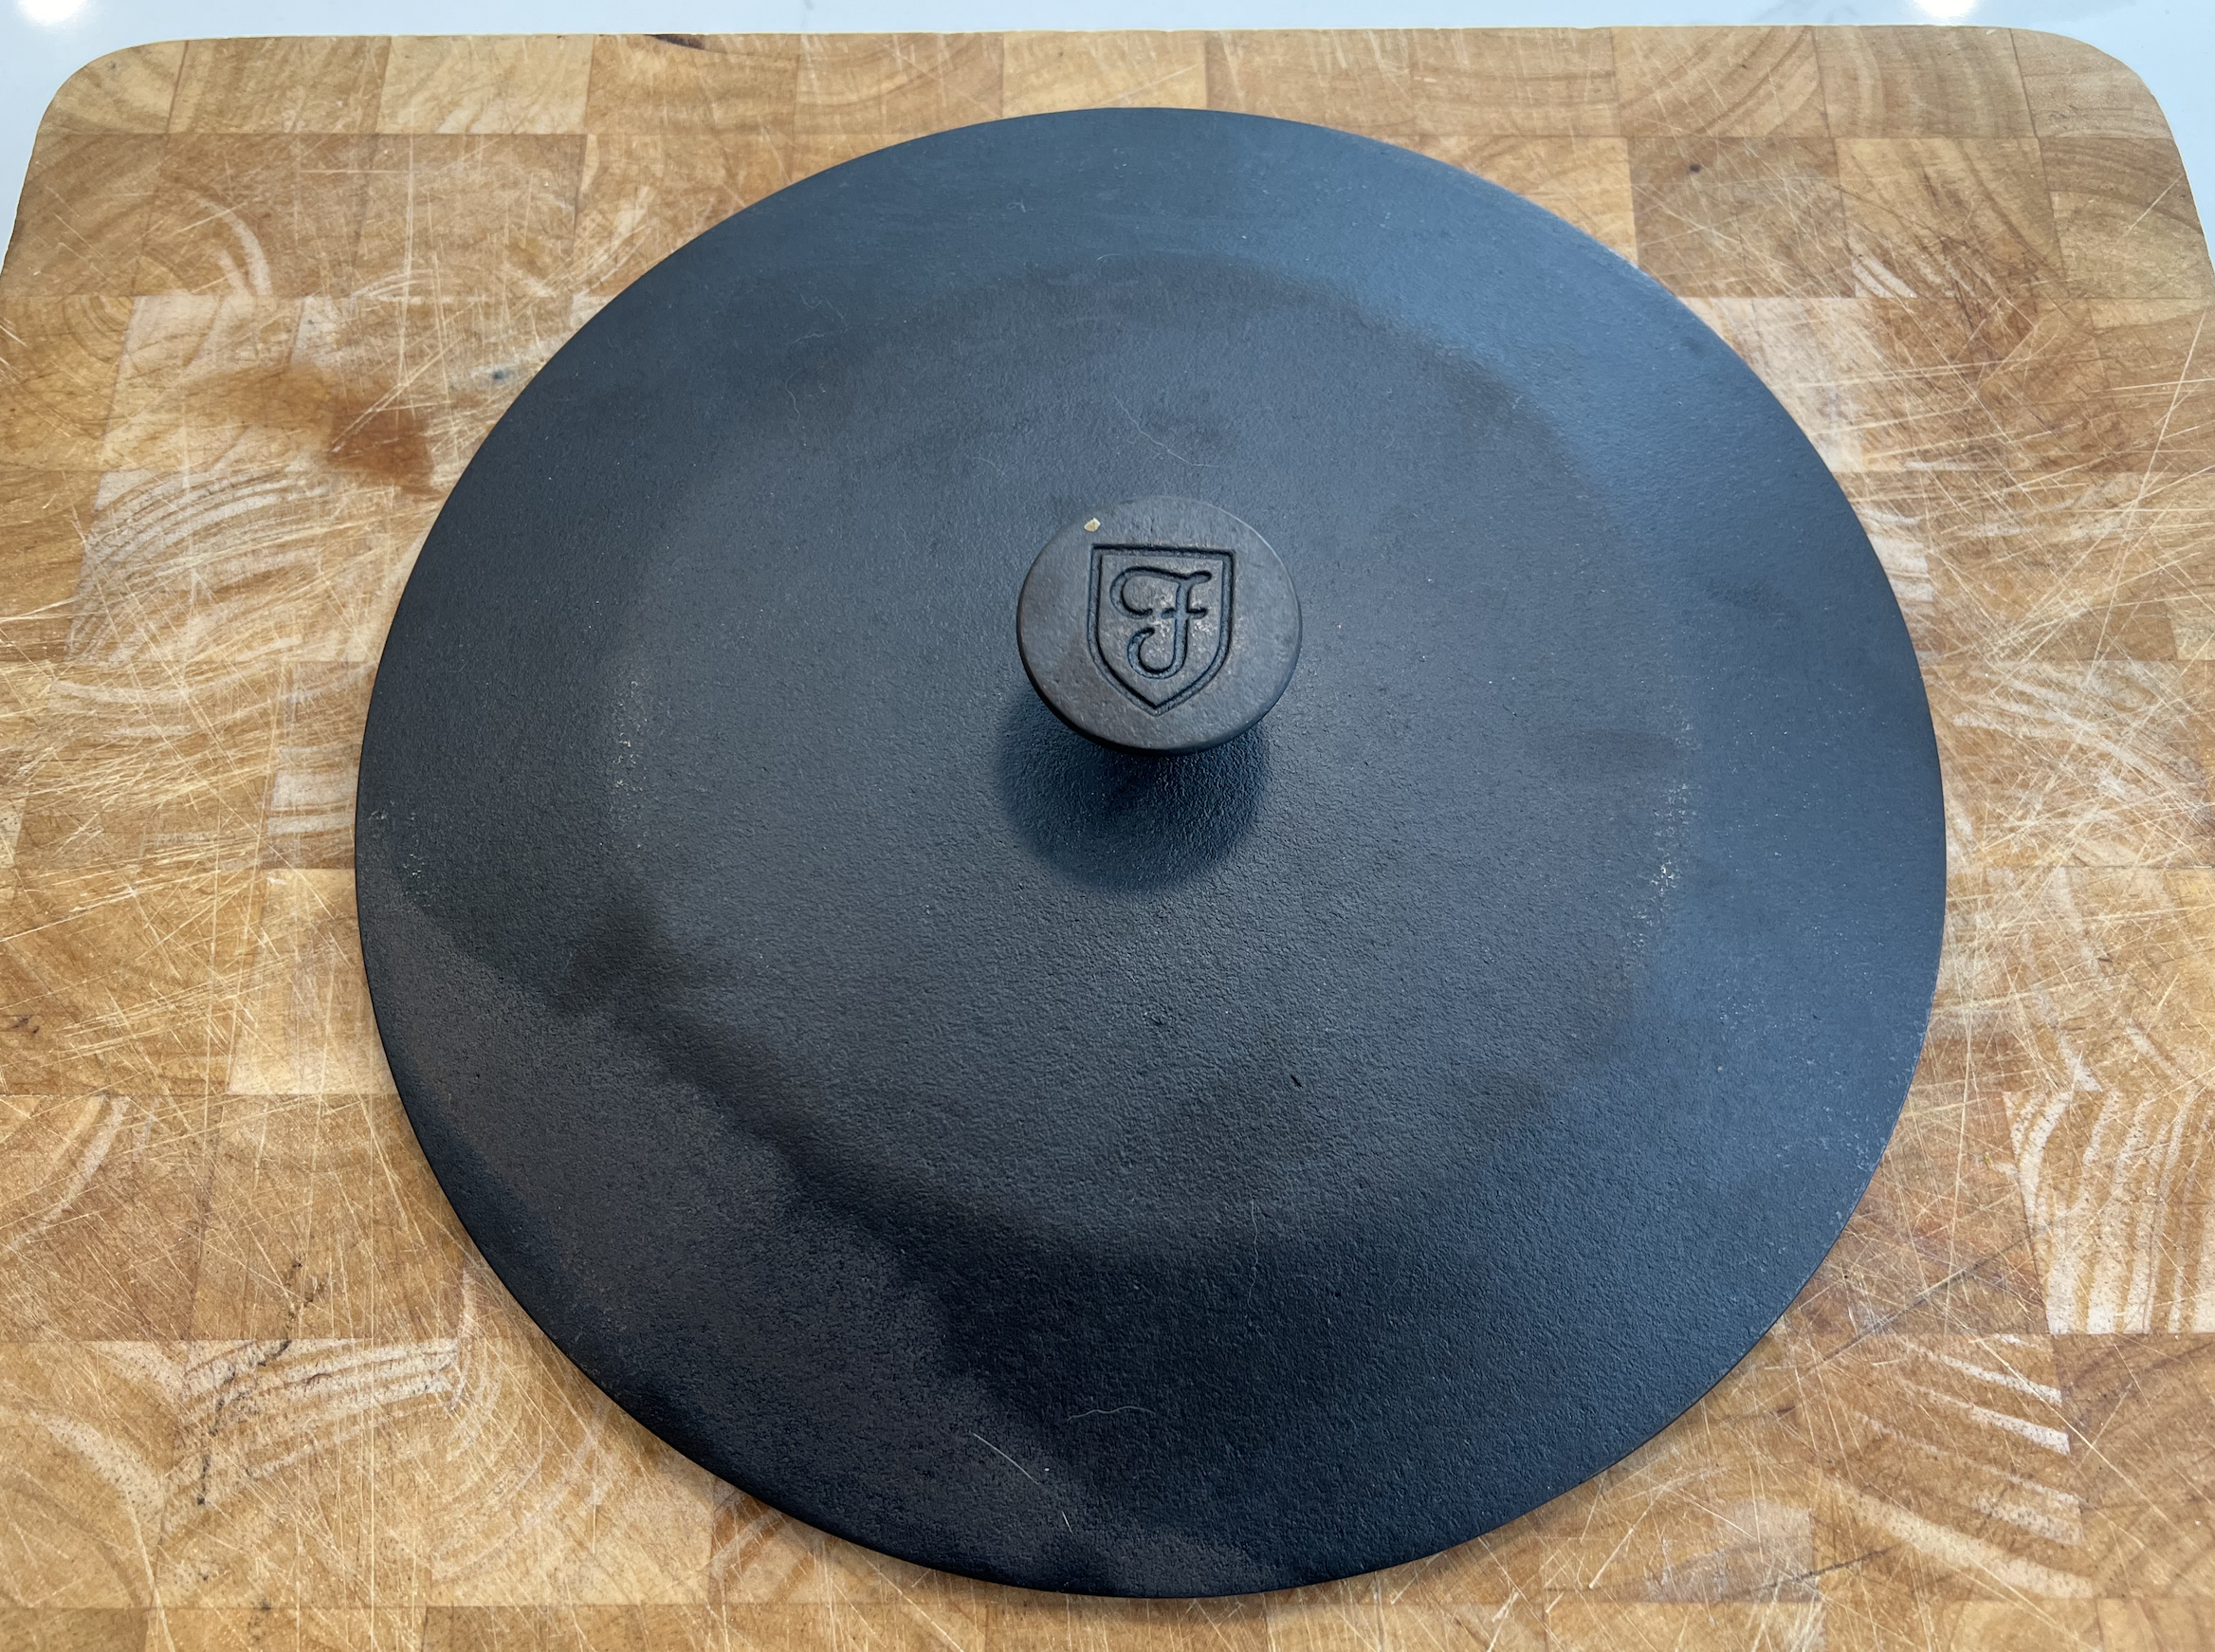 sourdough product review field company dutch oven handmade of cast iron in the united states of america 6